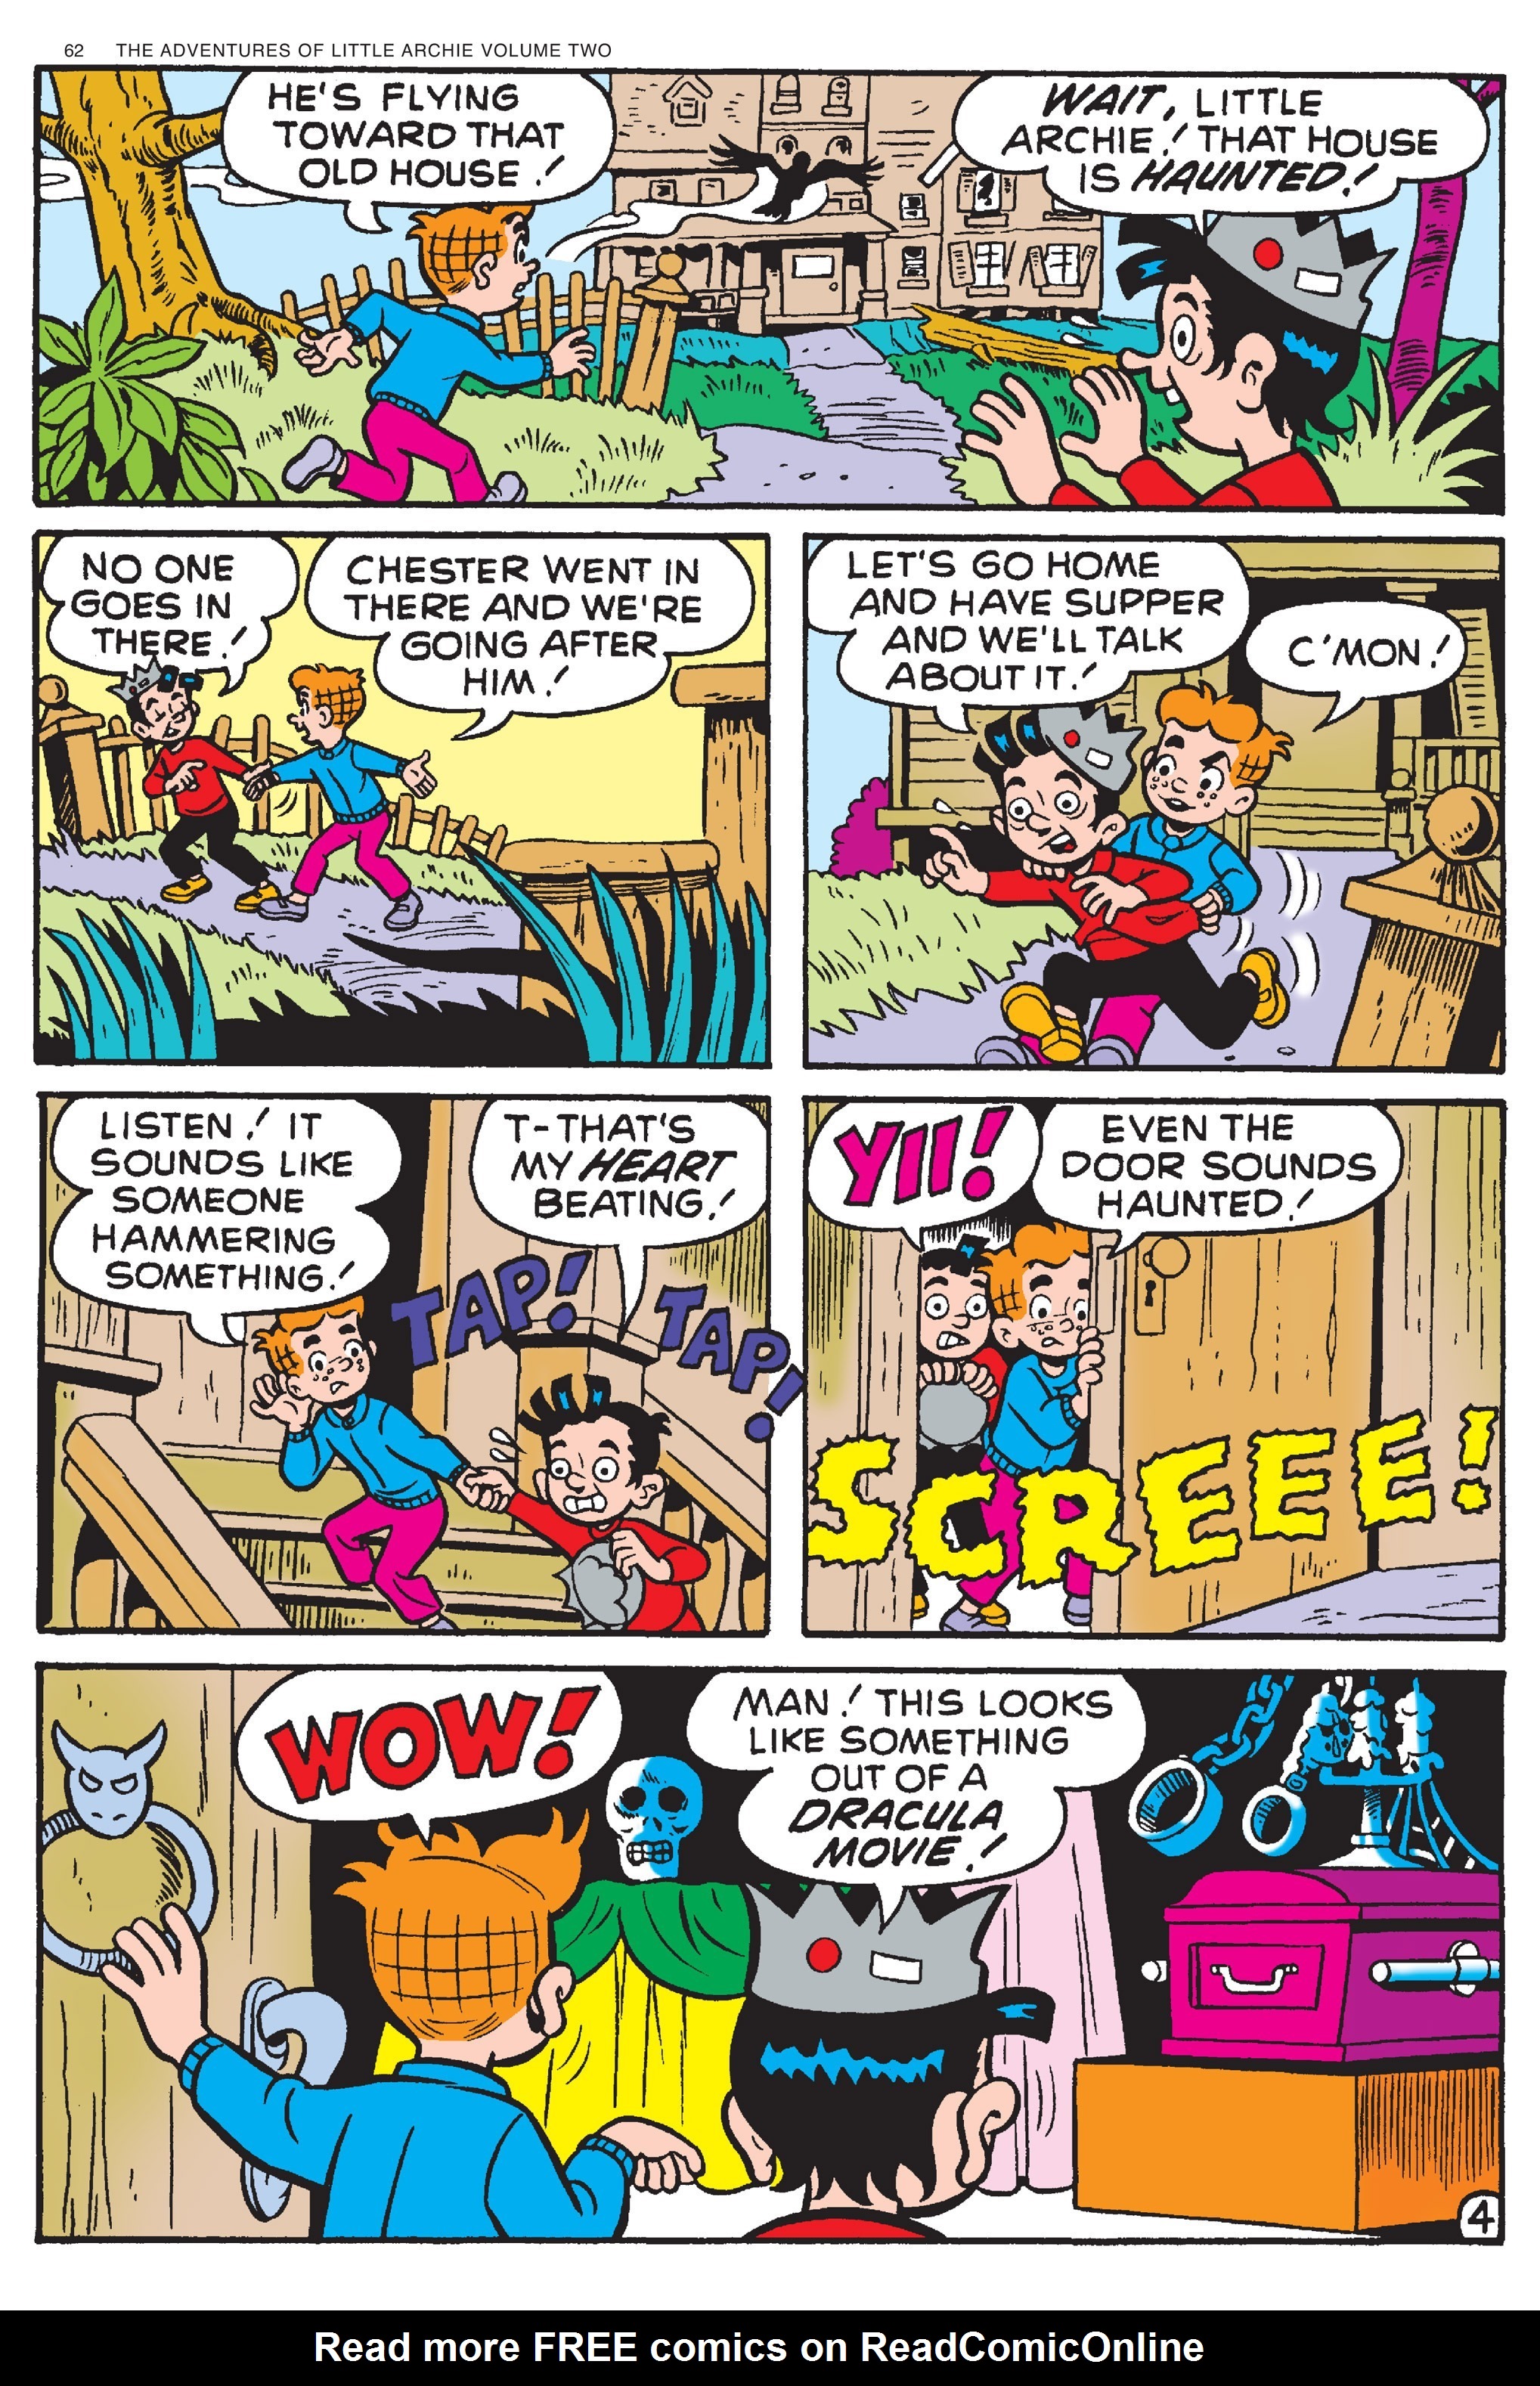 Read online Adventures of Little Archie comic -  Issue # TPB 2 - 63